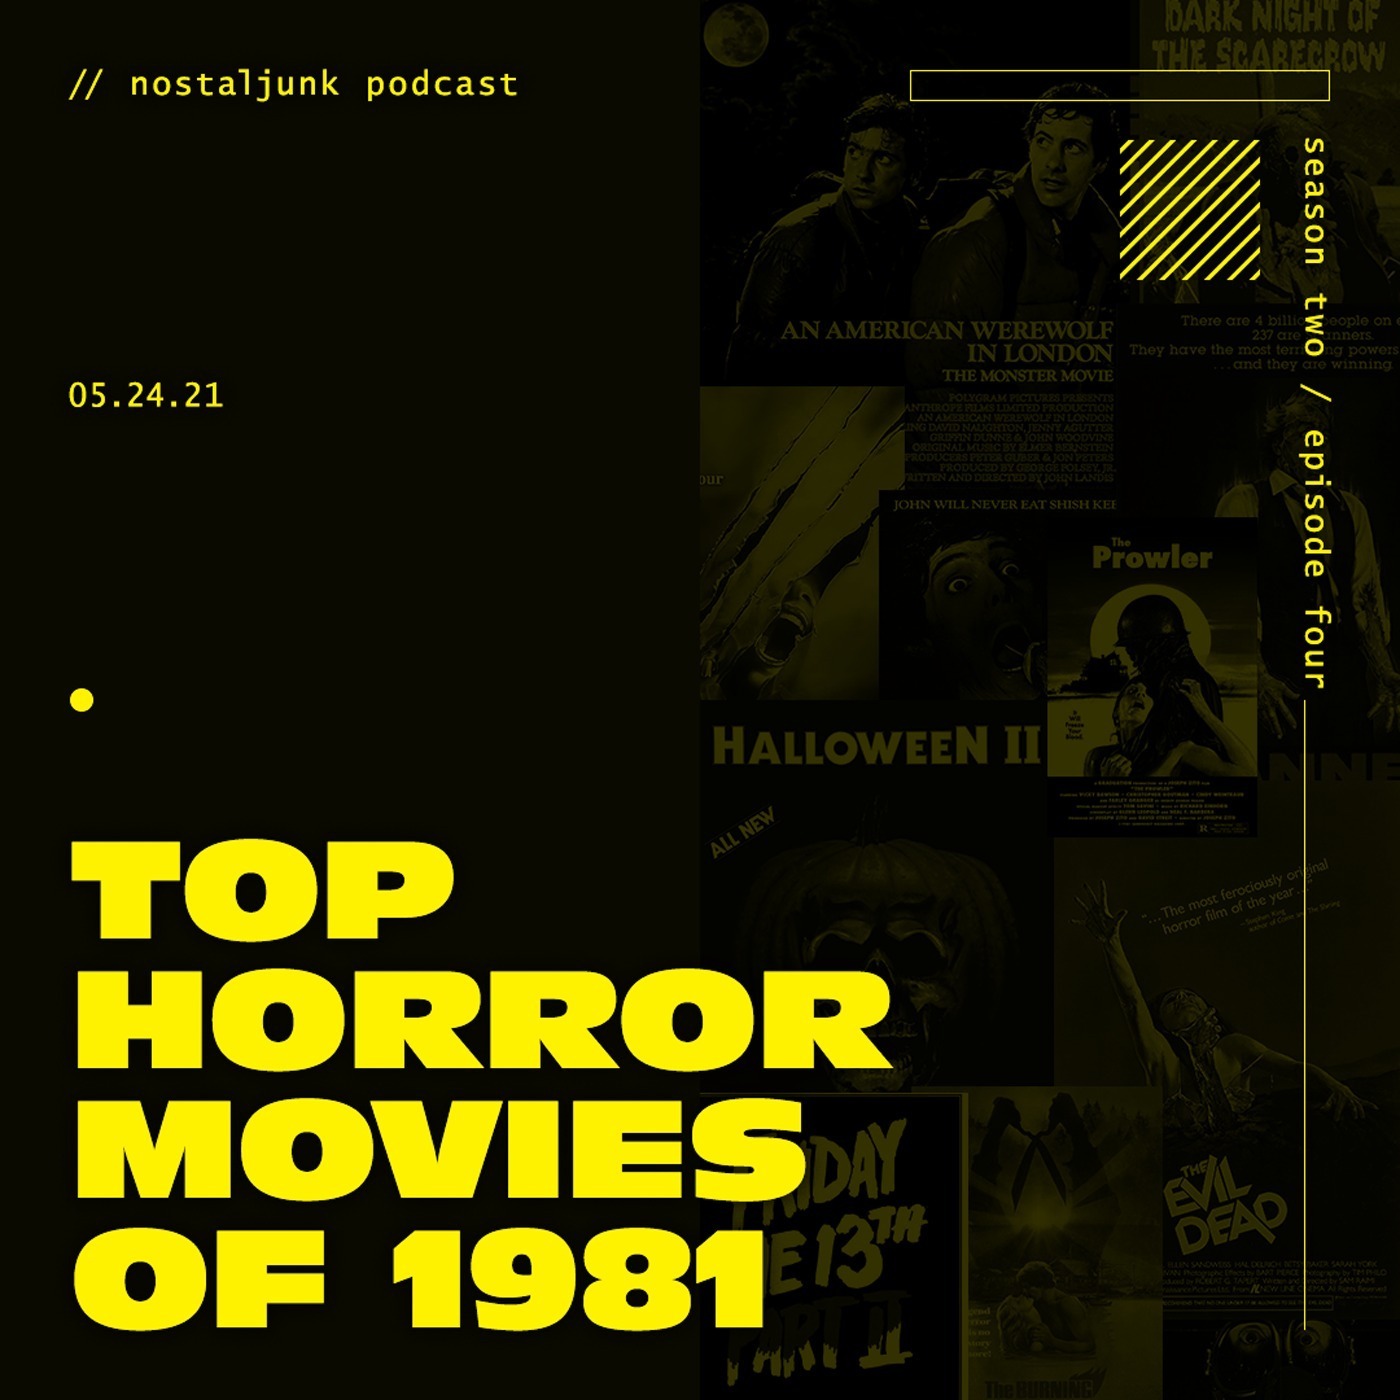 Top Horror Movies of 1981 Image